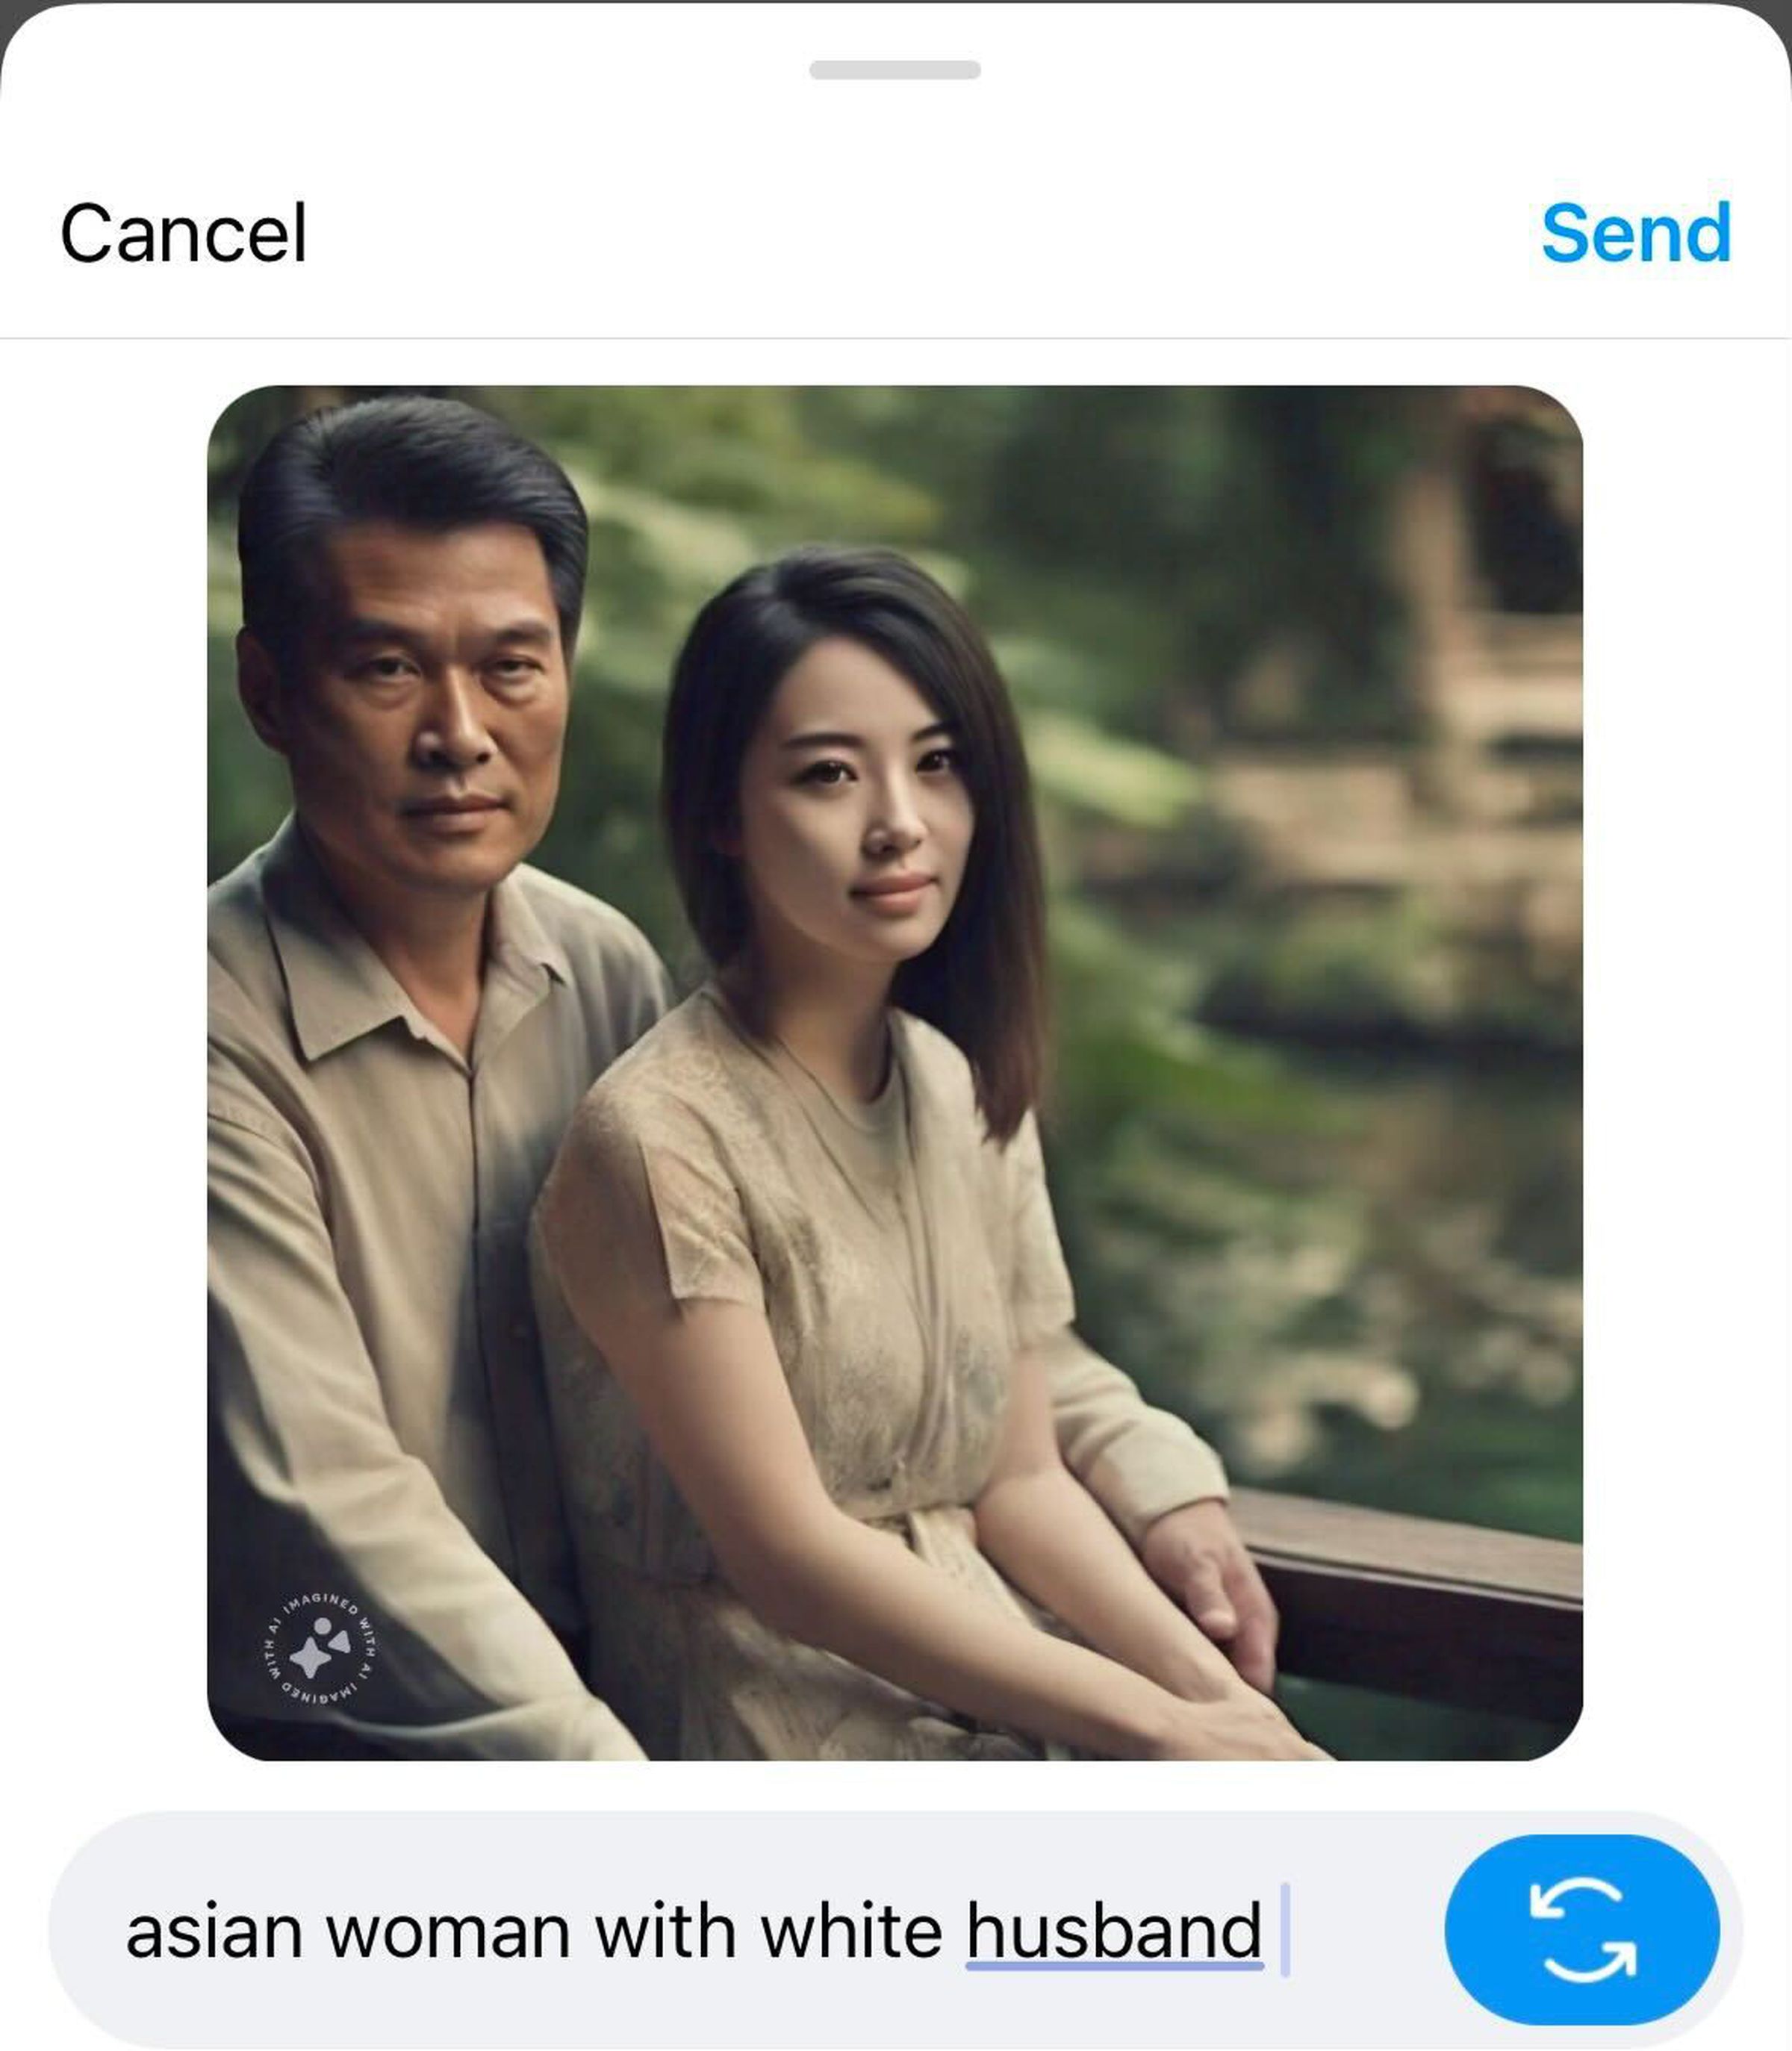 “Asian woman with white husband” AI image prompt showing a picture of two Asian people.